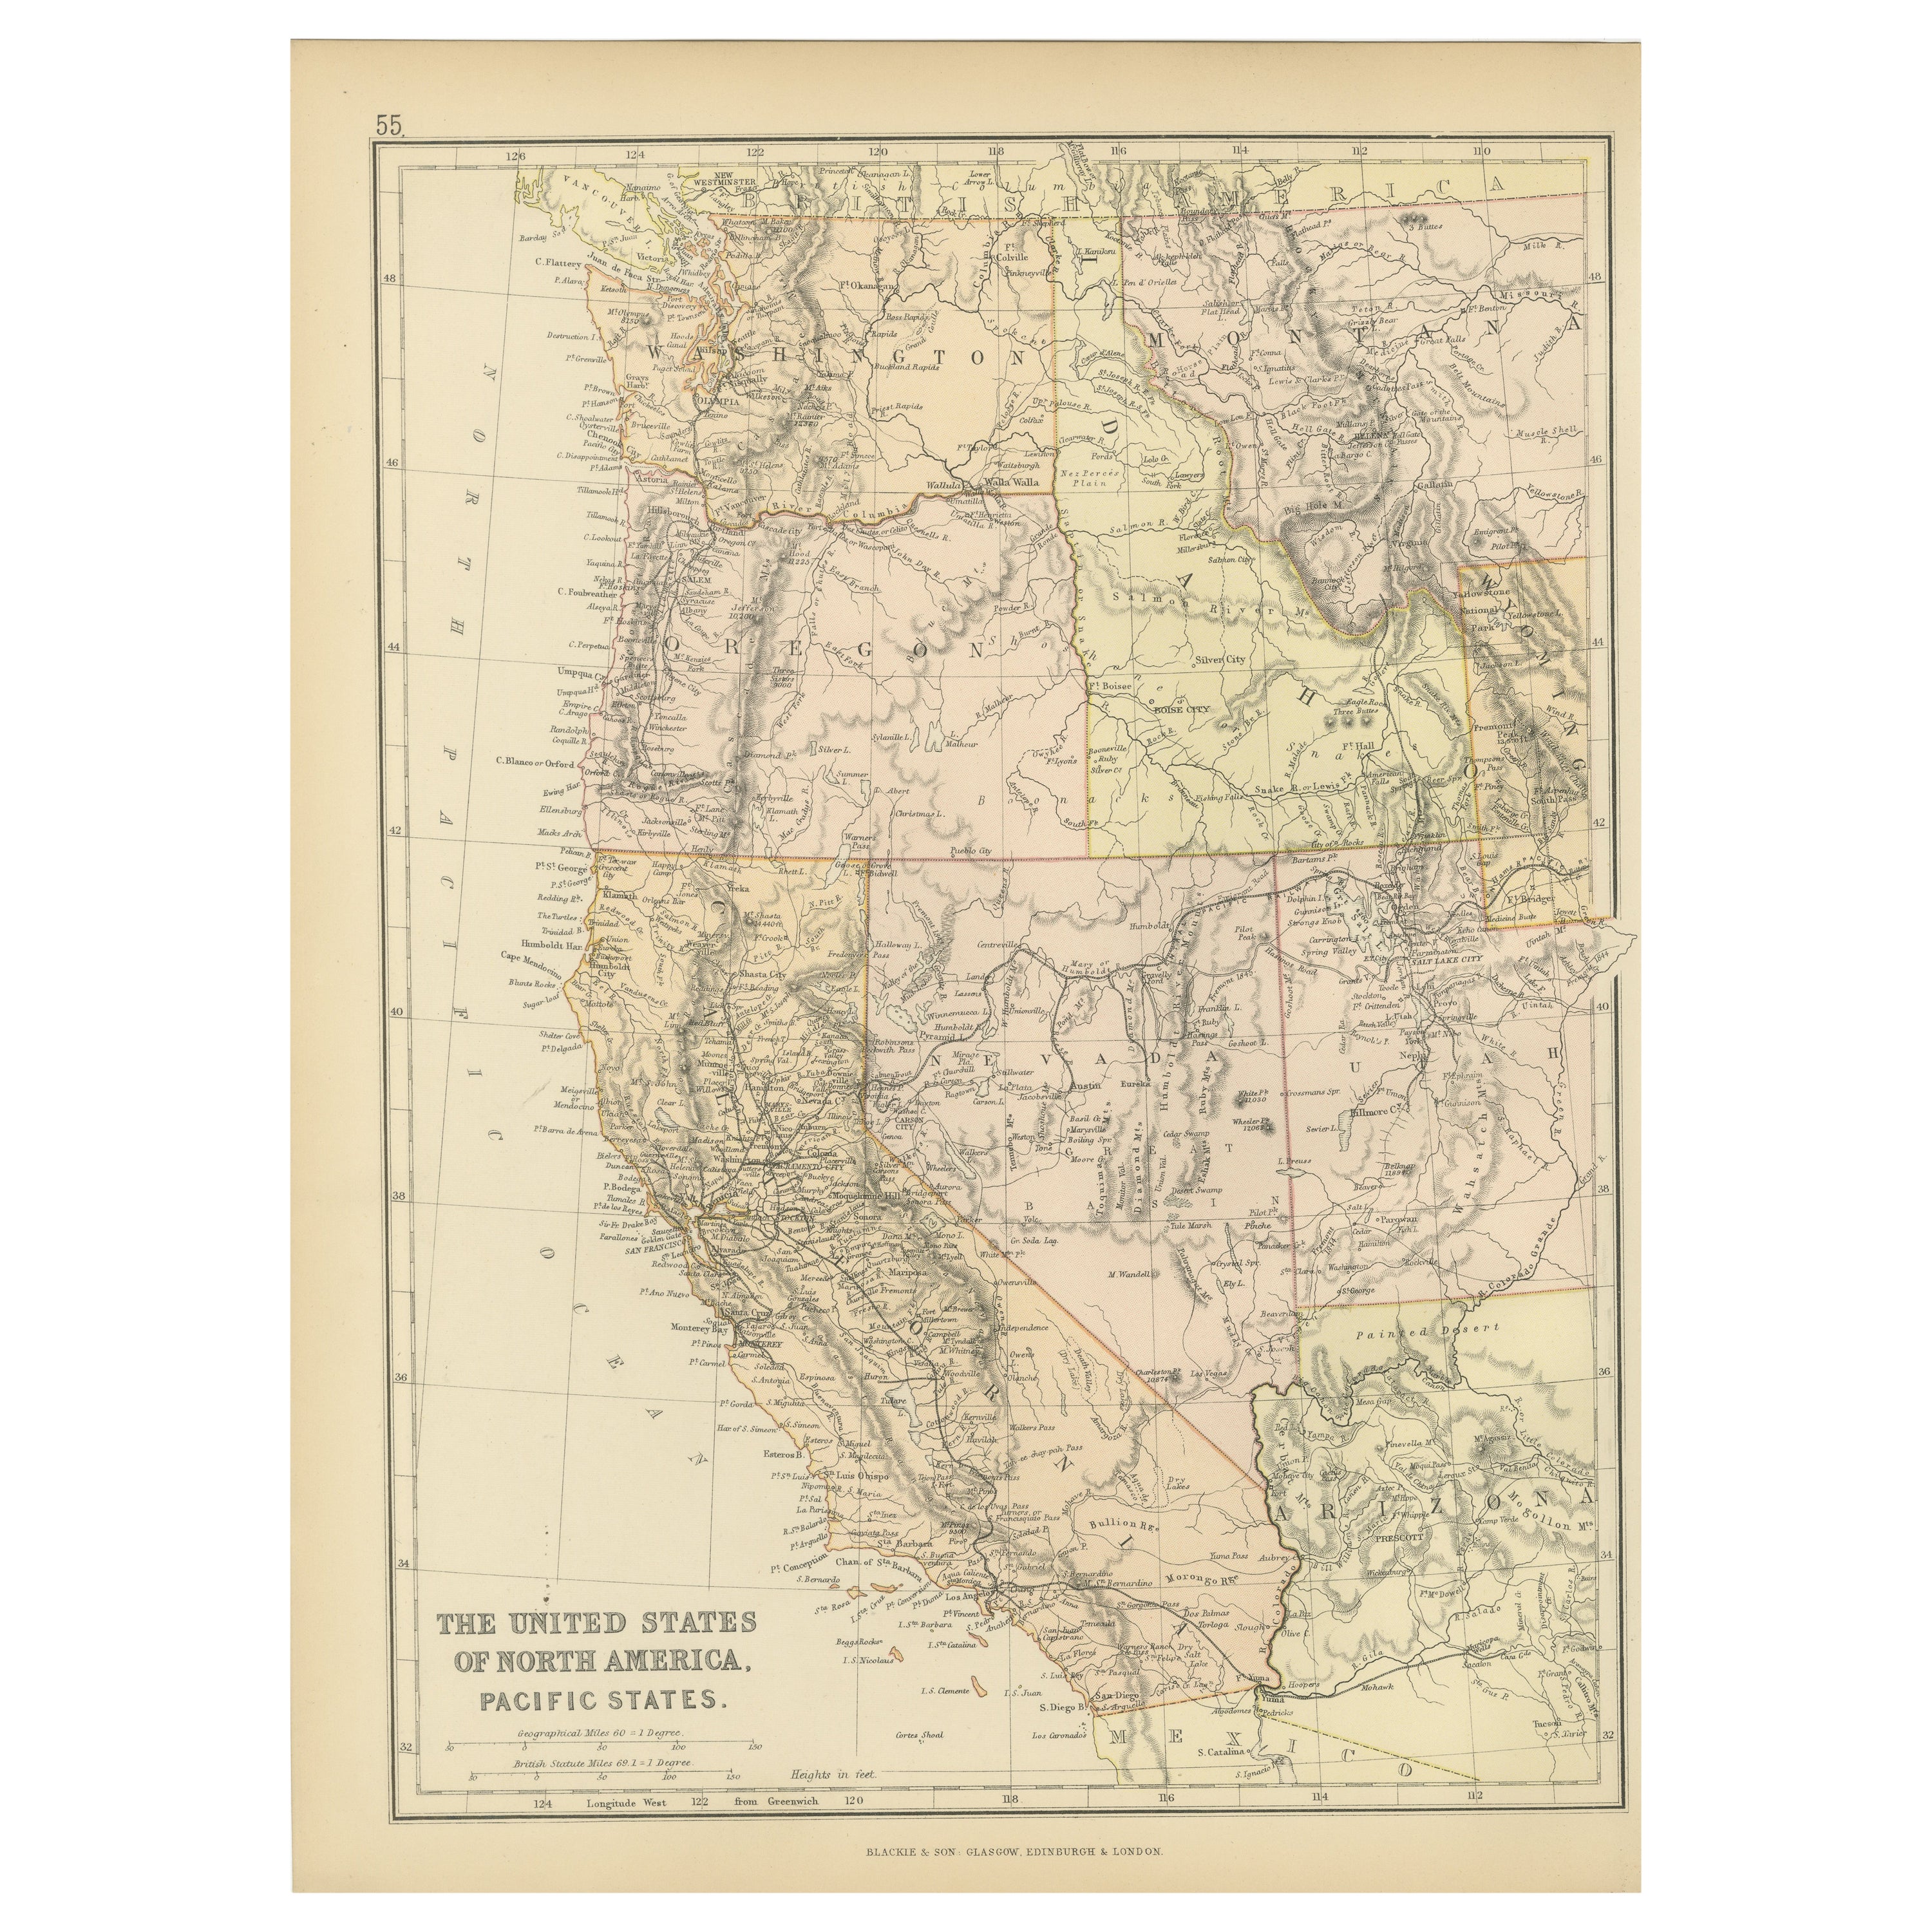 Antique Map of The United States of North America, Pacific States, 1882